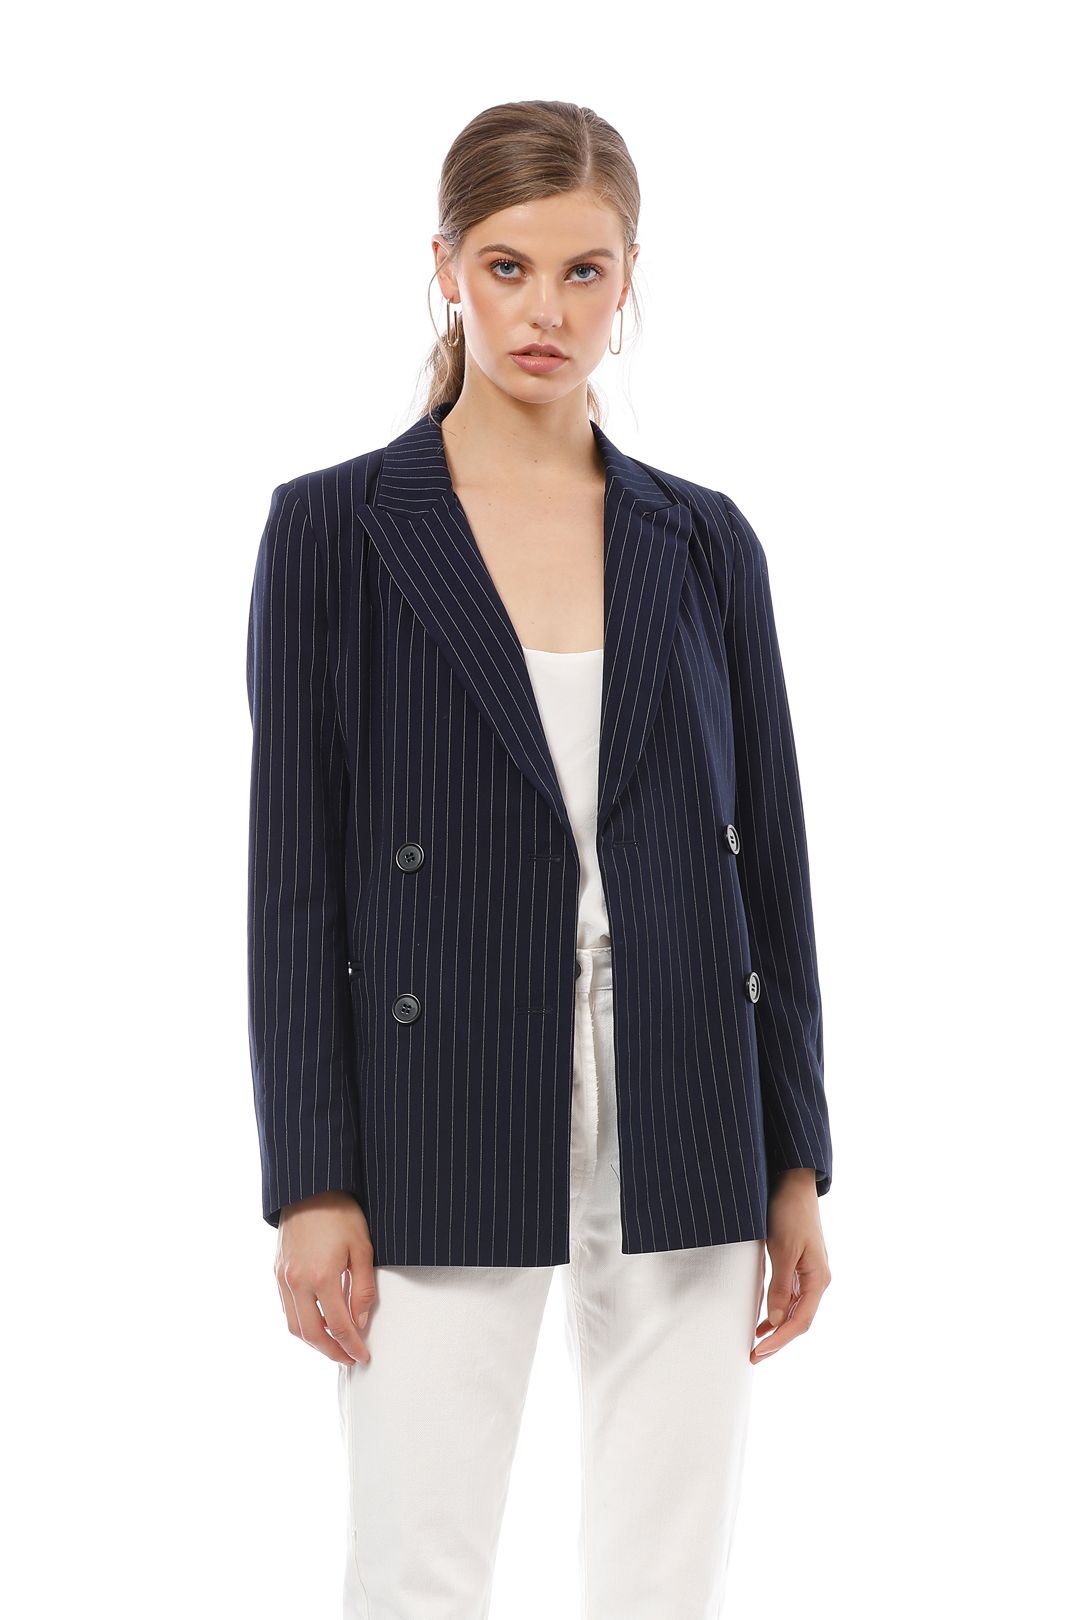 Cecile Navy Striped Blazer by Friend of Audrey for Hire